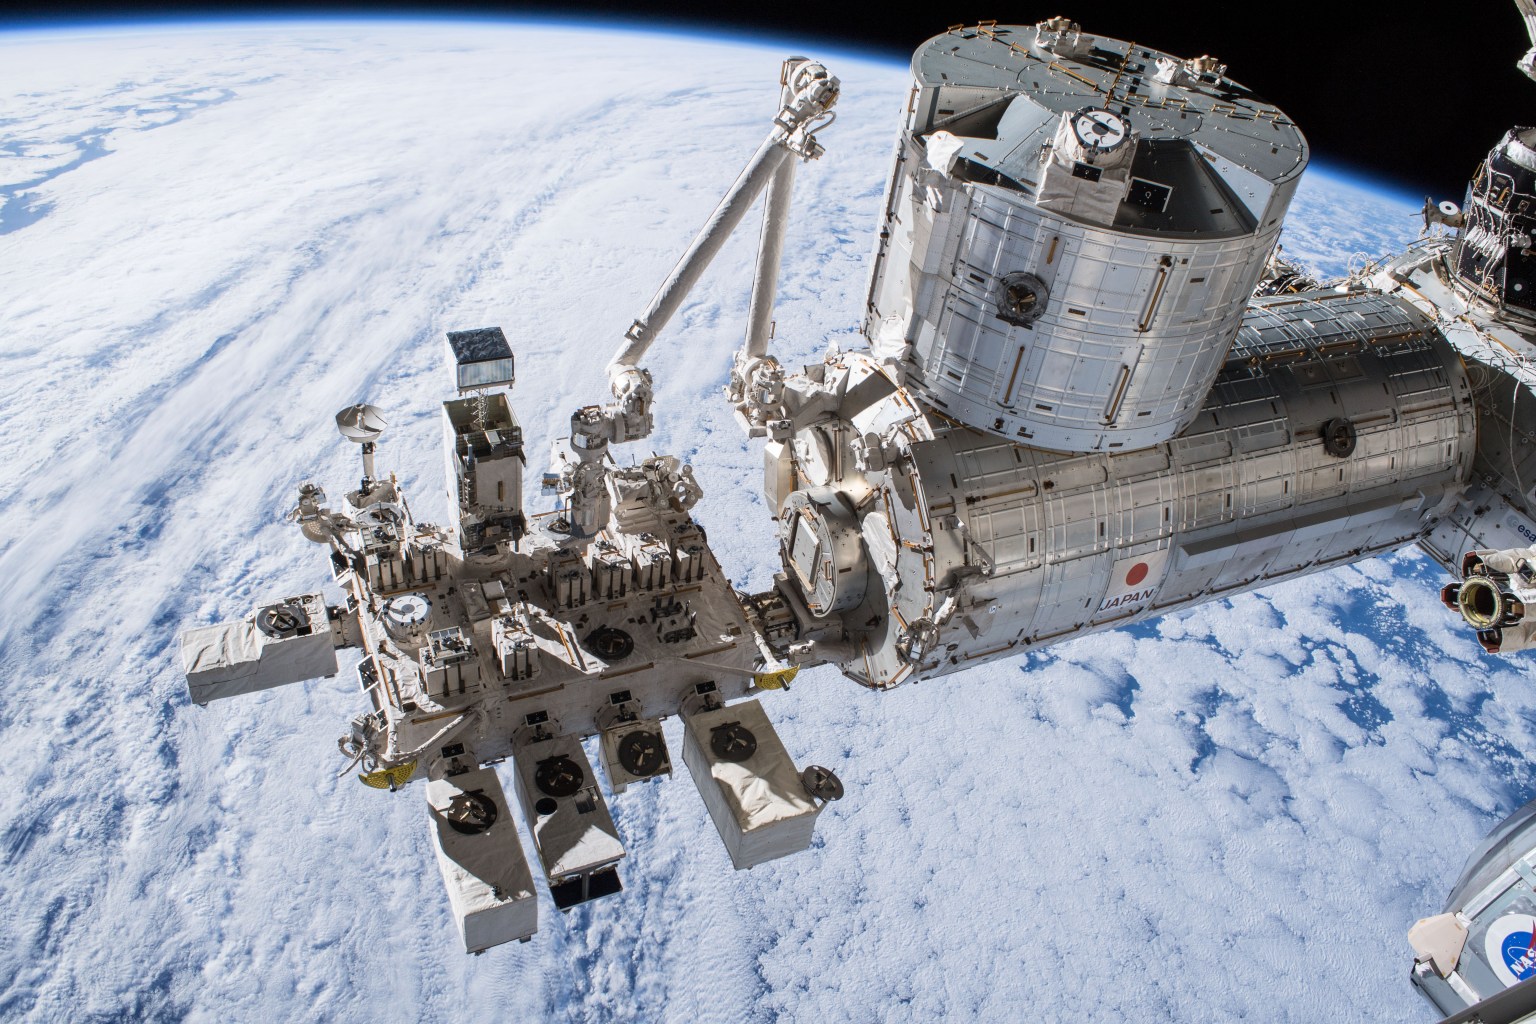 The Kibo laboratory module from the Japan Aerospace Exploration Agency (comprised of a pressurized module and exposed facility, a logistics module, a remote manipulator system and an inter-orbit communication system unit) was pictured as the International Space Station orbited over the southern Pacific Ocean east of New Zealand.